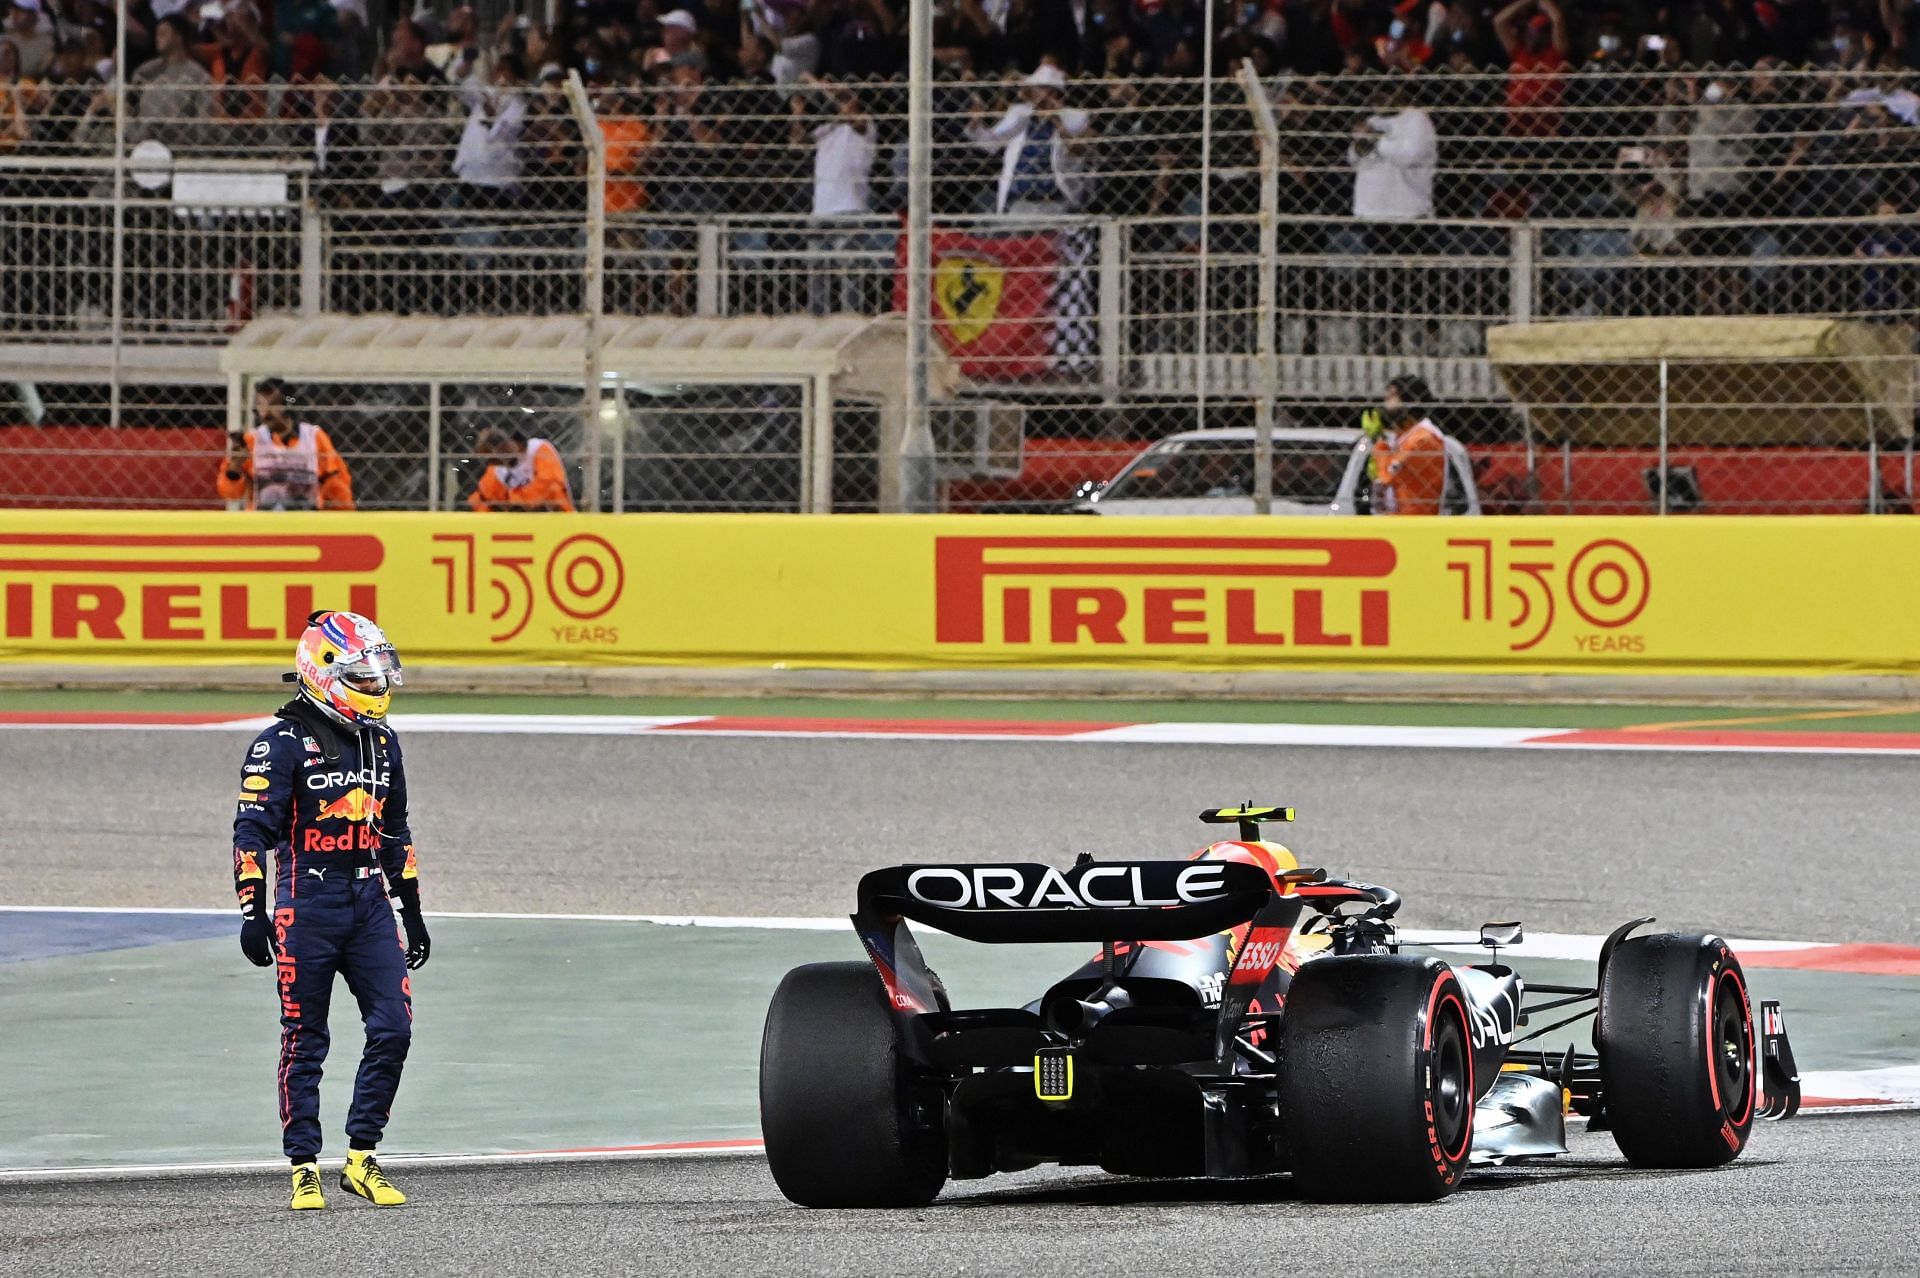 Red Bull Powertrains has suffered from extreme reliability issues this season